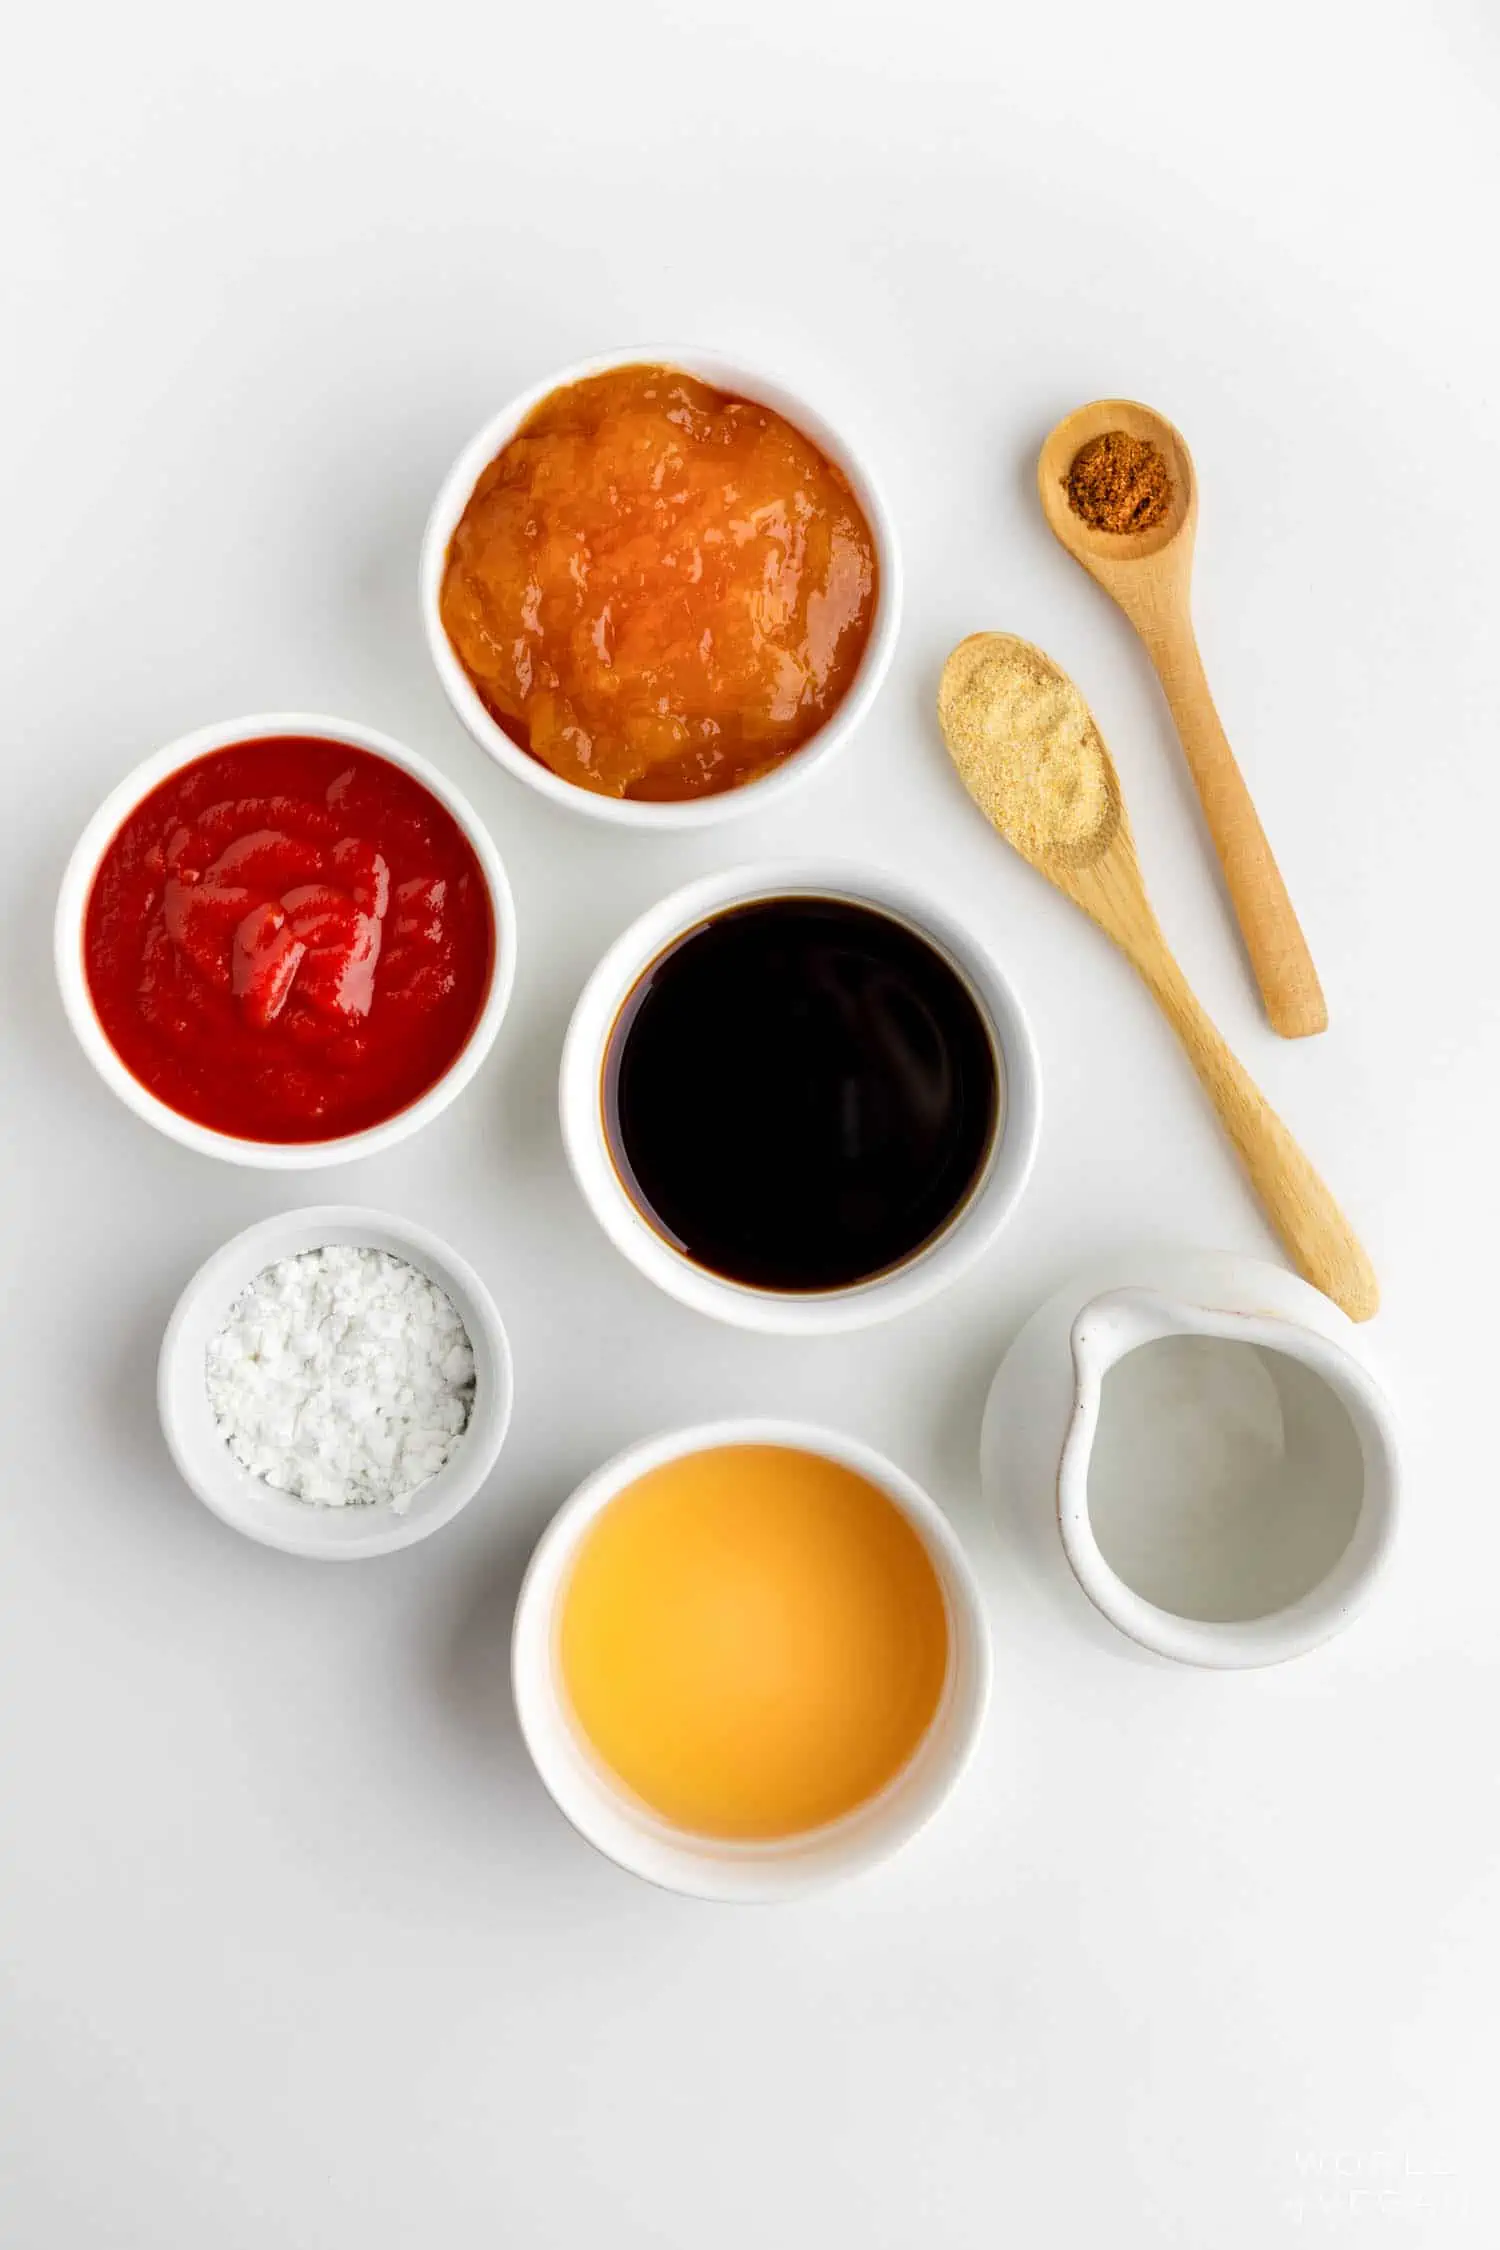 Sweet and sour sauce ingredients flatlay with ketchup jam soy sauce and more.